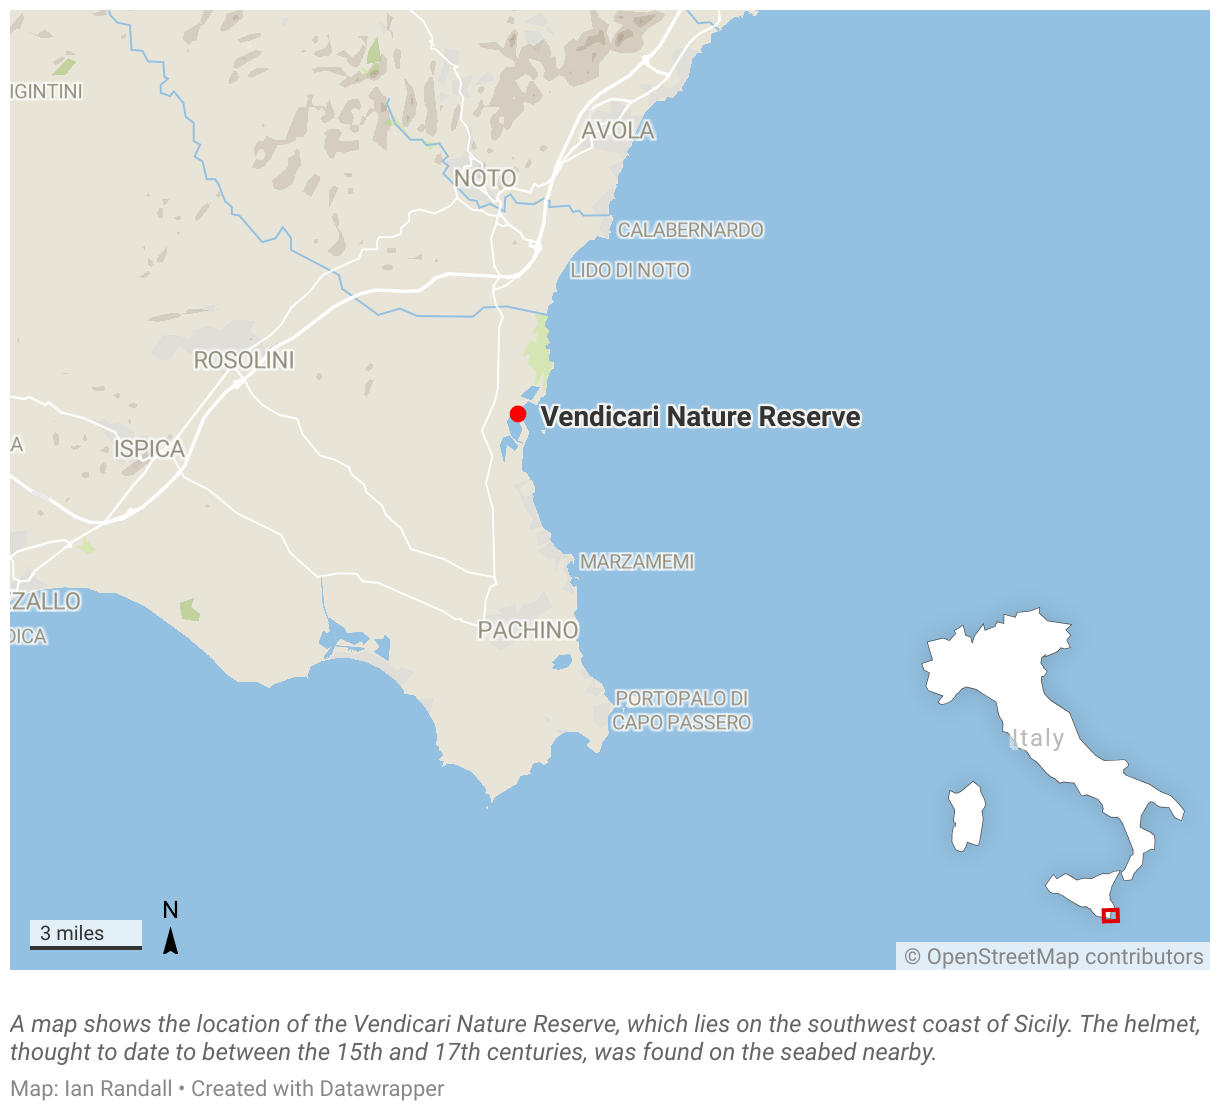 A map shows the location of the Vendicari Nature Reserve, which lies on the southwest coast of Sicily.